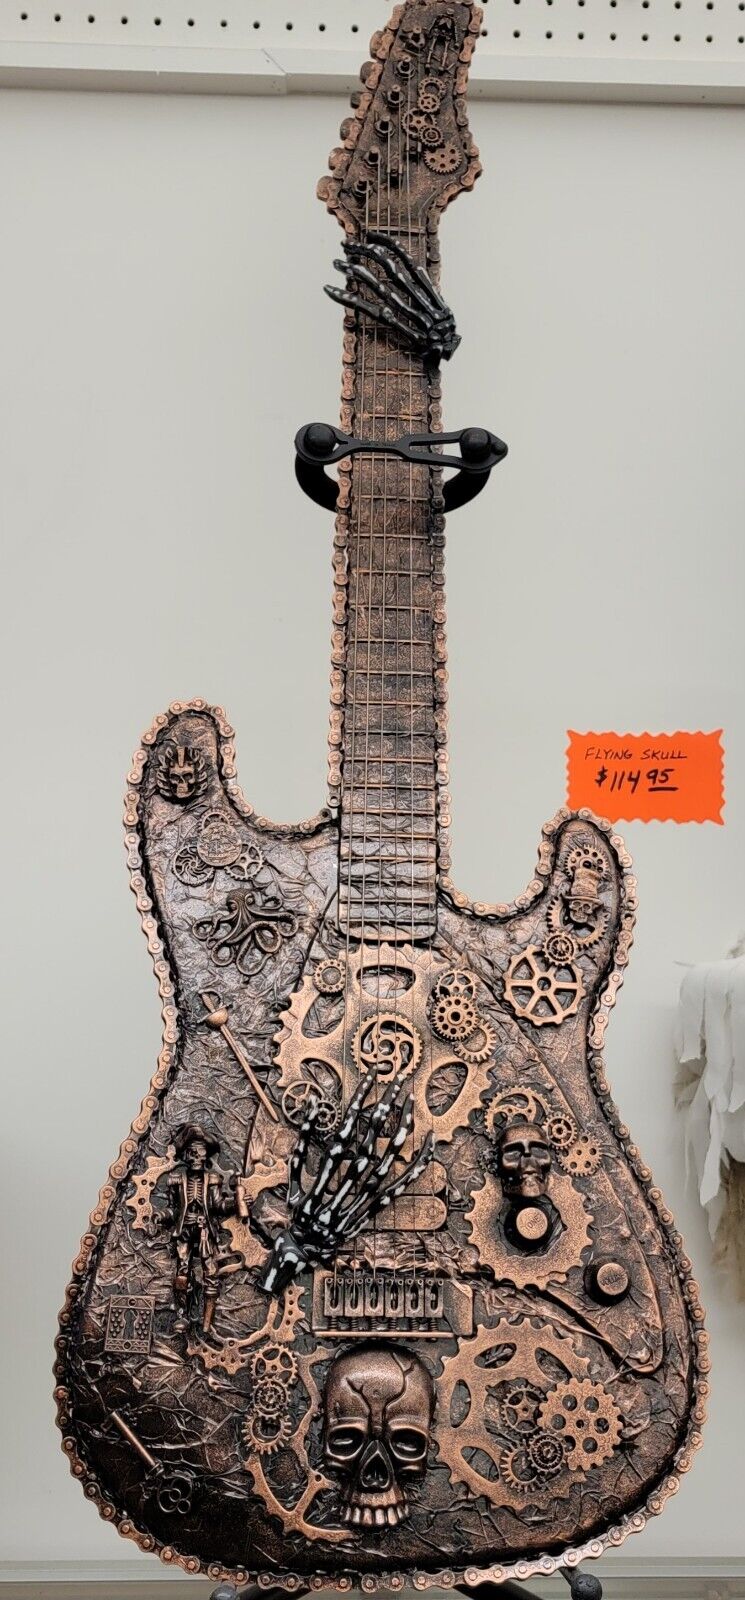 LAST CALL SALE: One of a Kind Gothic Steampunk Electric Guitar Hand Made